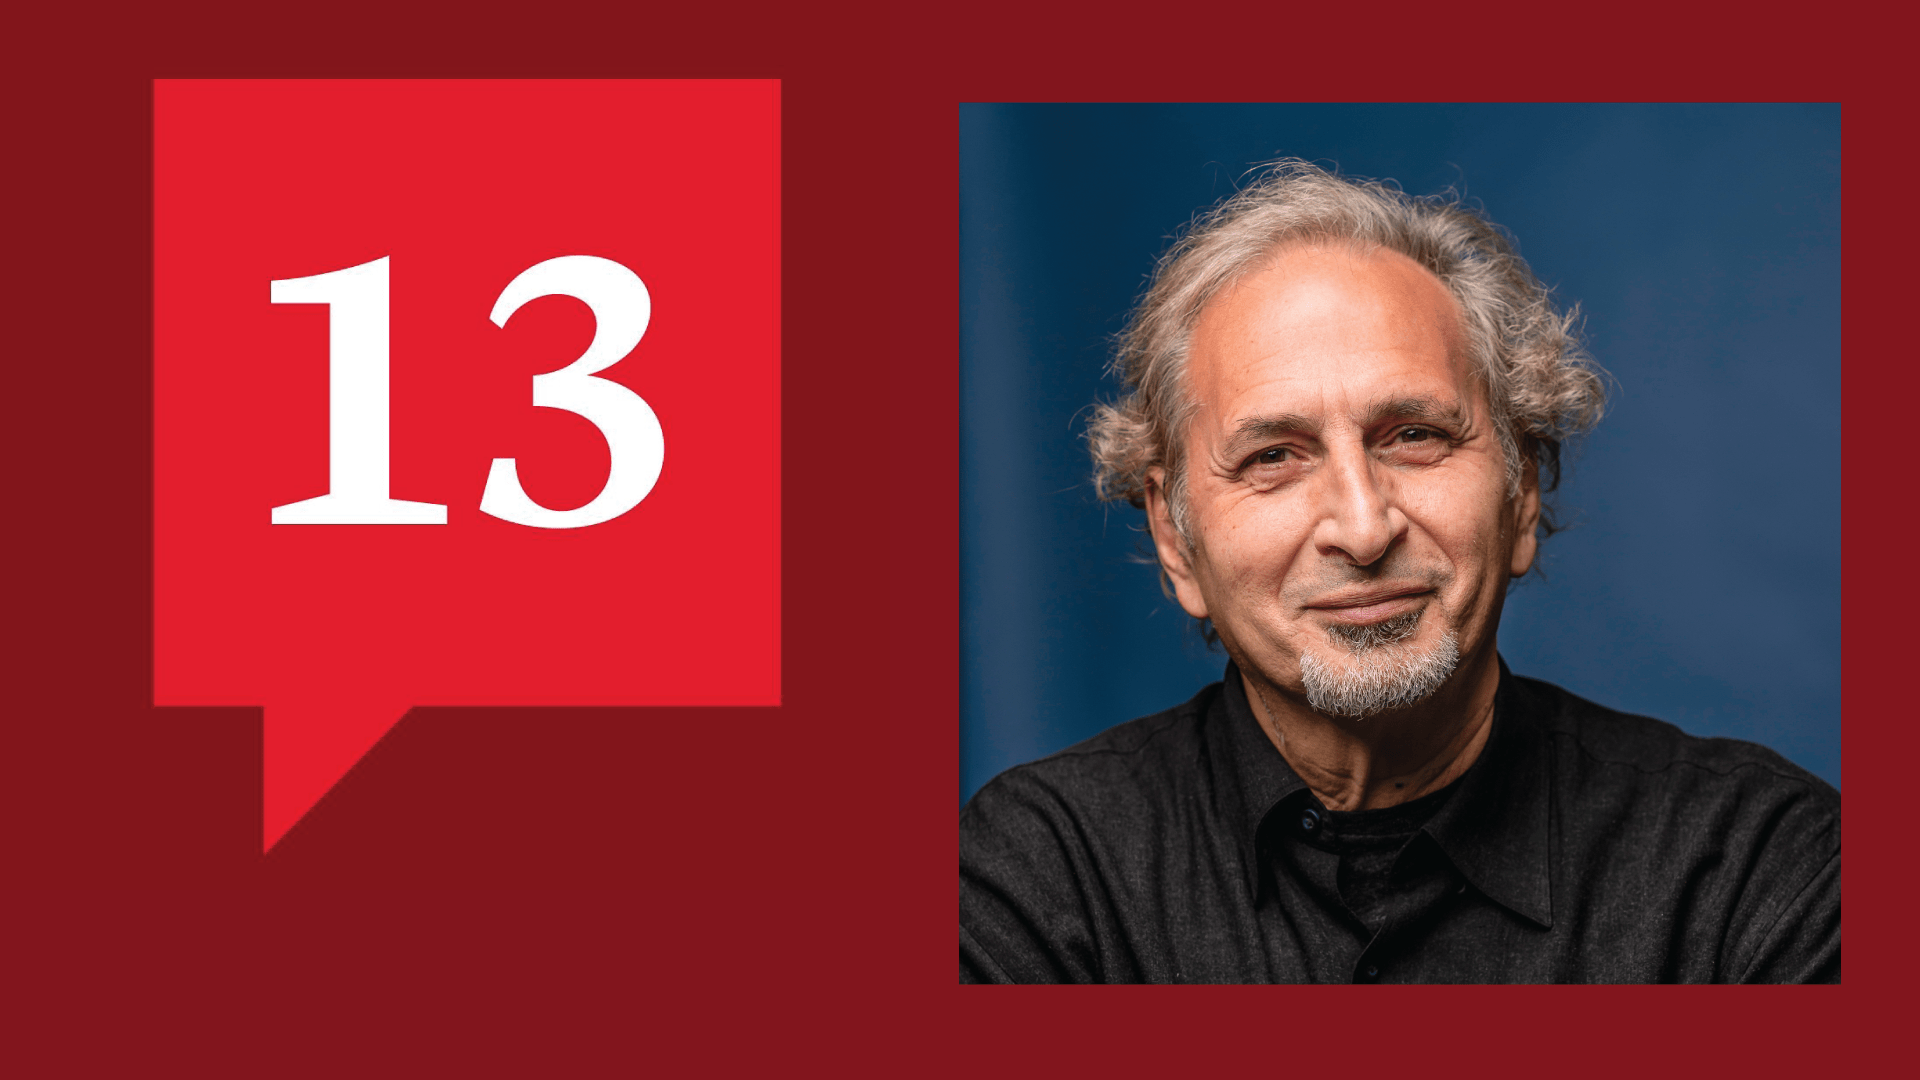 Portrait of Peter Balakian and 13 icon